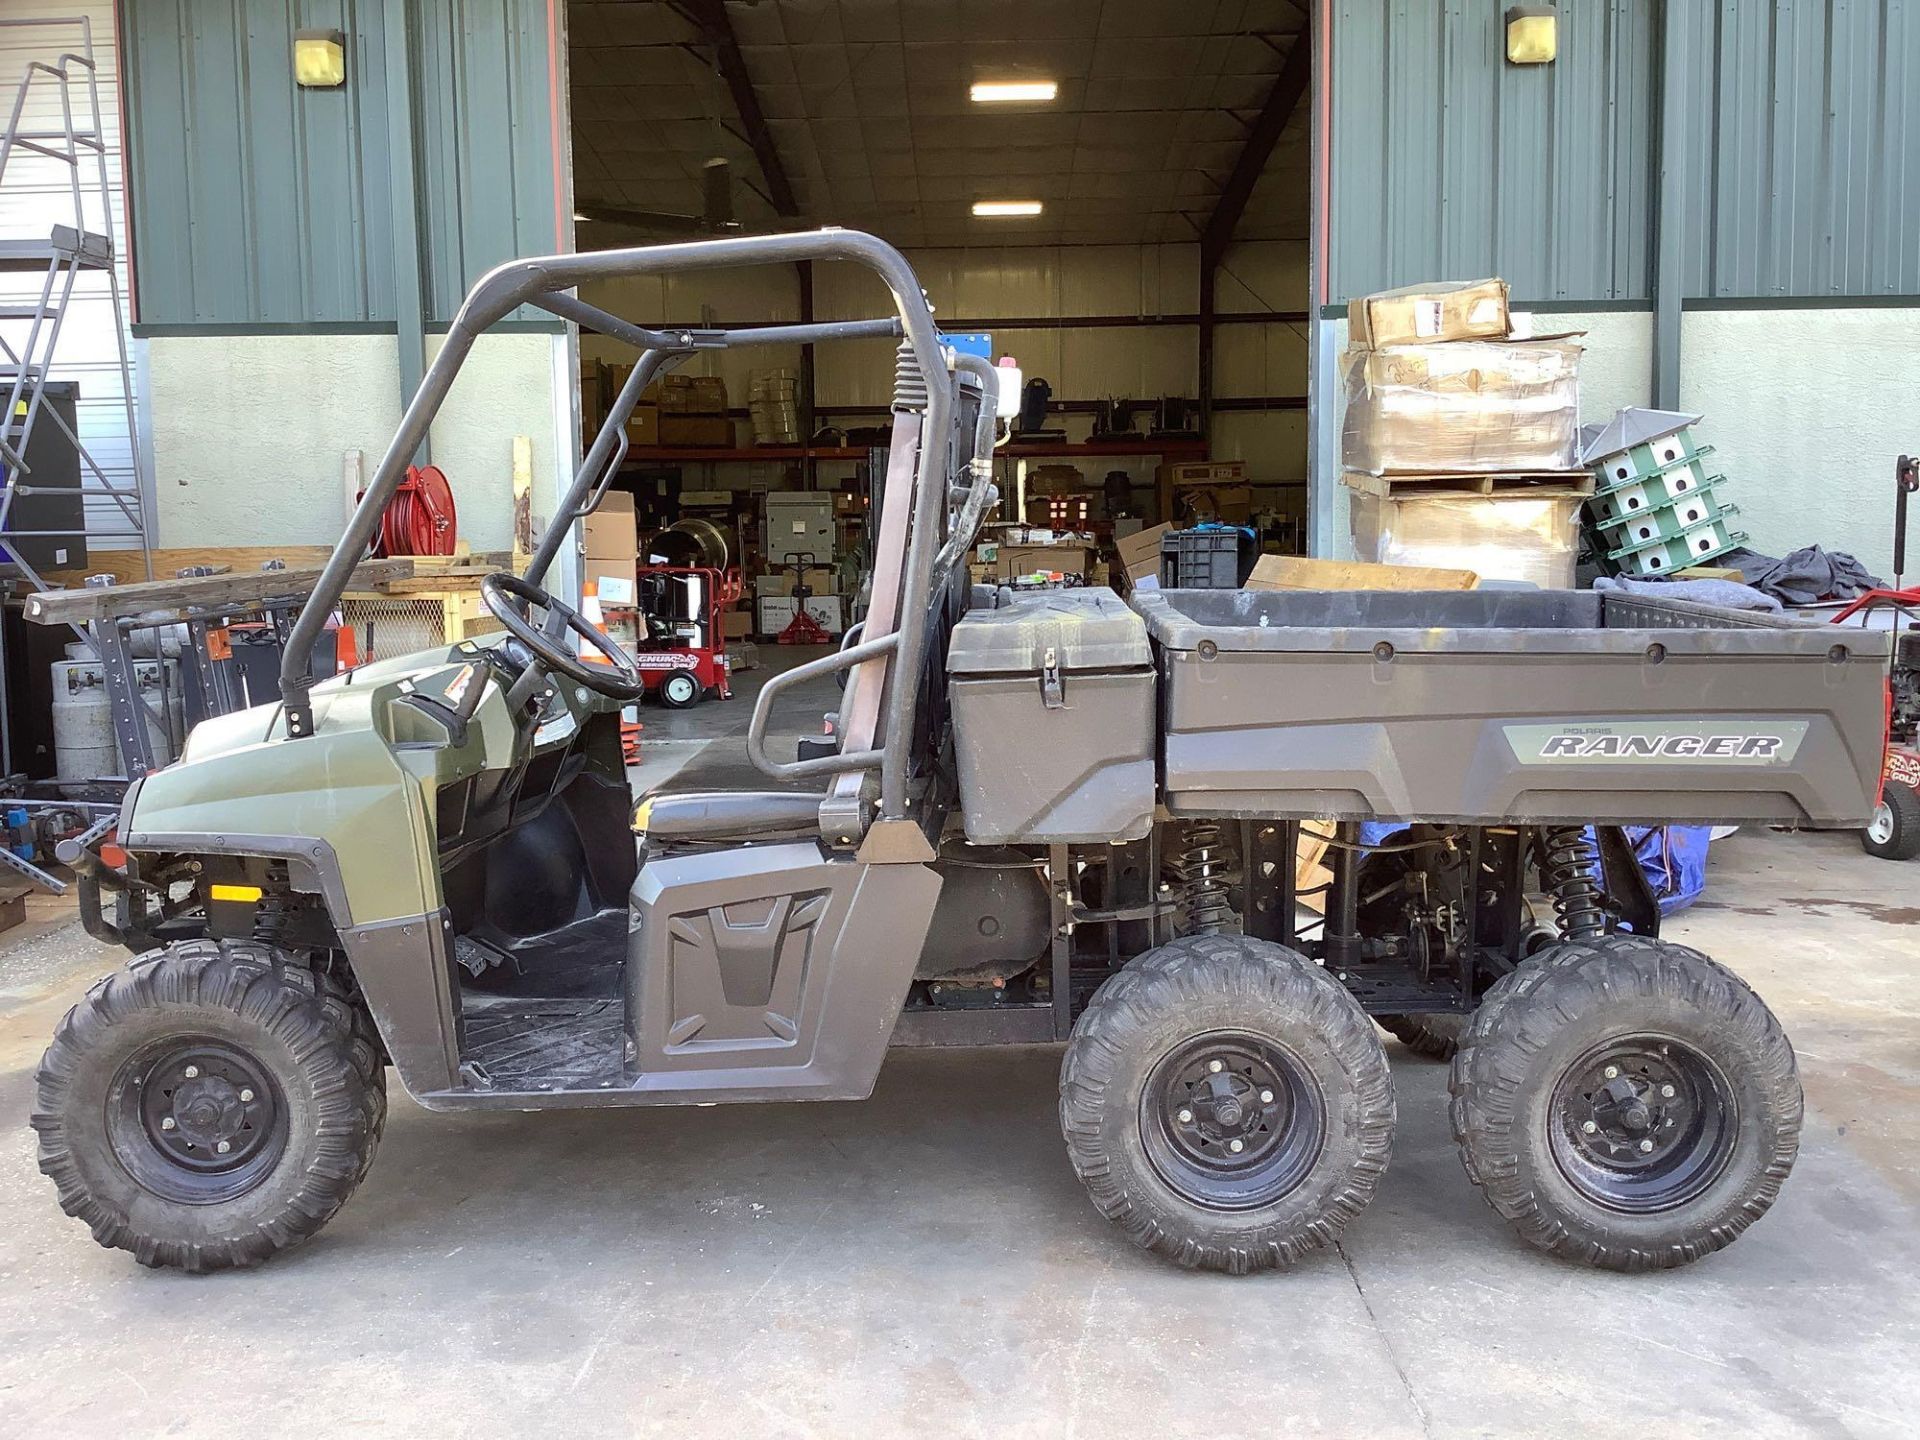 2011 POLARIS 6x6 RANGER 700, GAS POWERED, AWD, AUTOMATIC DUMP BED, STORAGE BOX APPROX 5FT LONG, HITC - Image 9 of 23